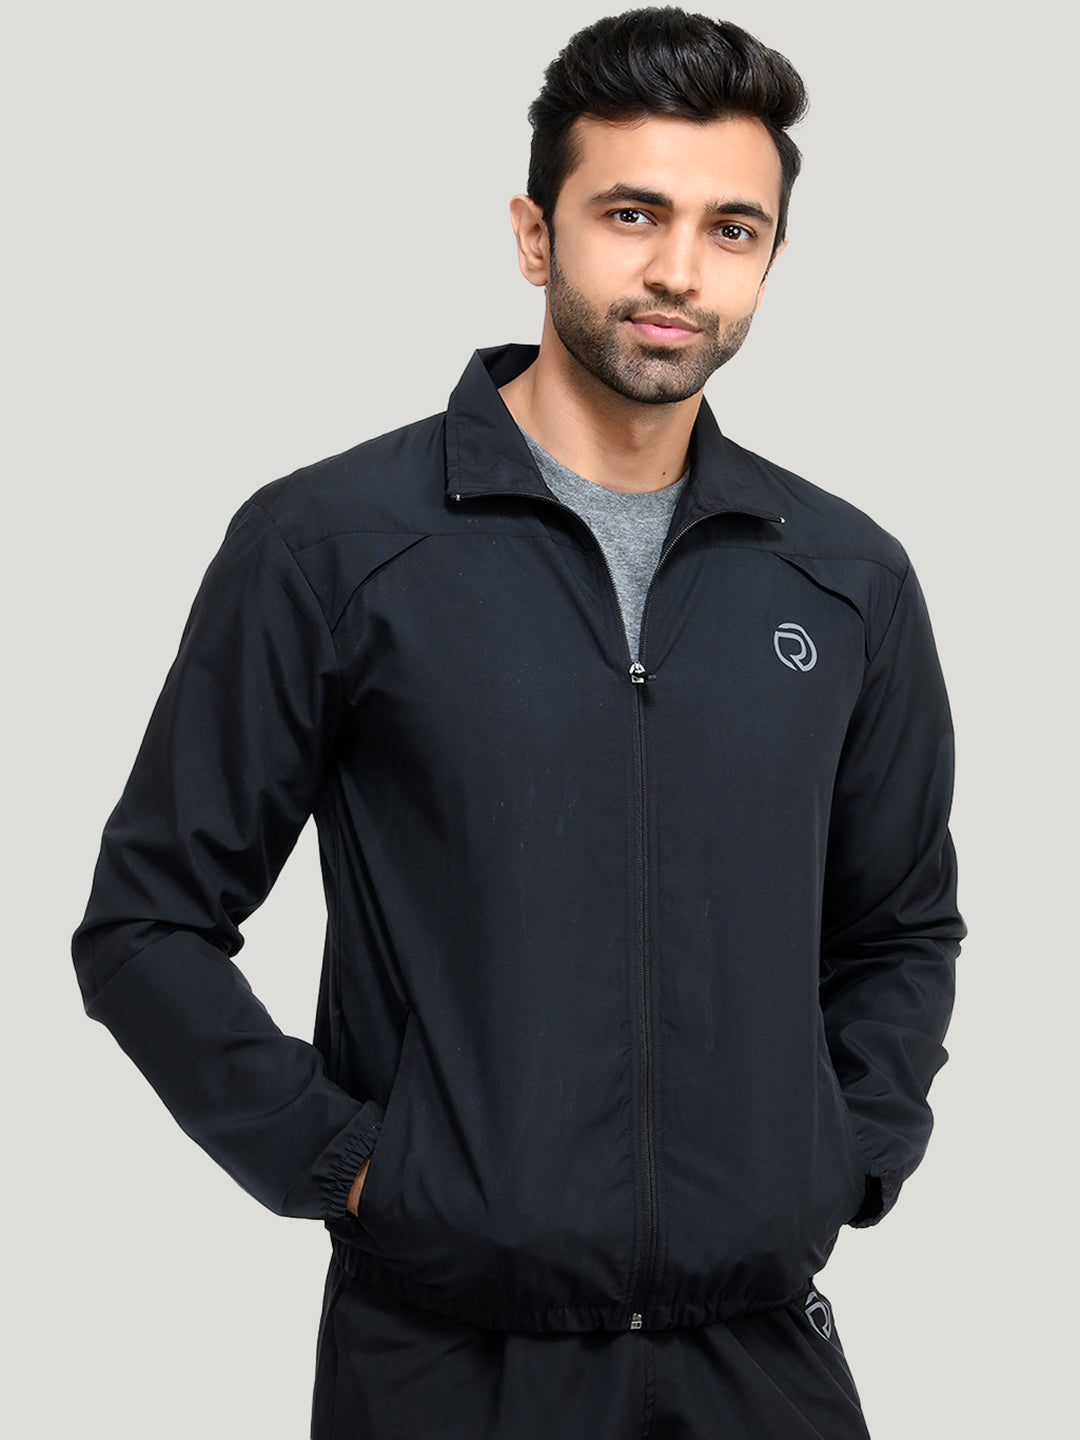 Best Offers on Mens sports jackets upto 20-71% off - Limited period sale